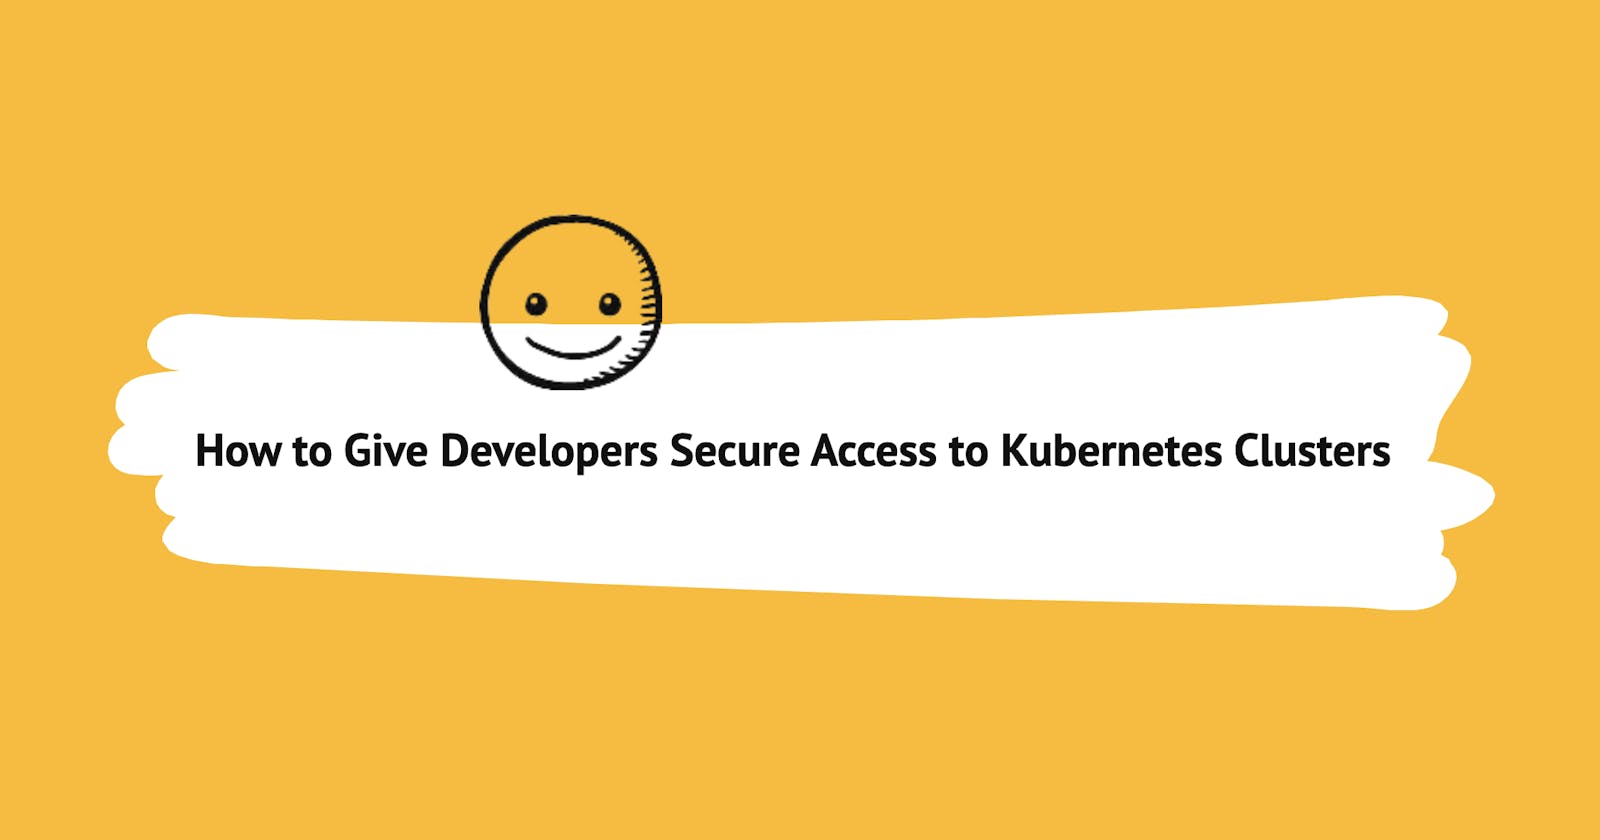 How to Give Developers Secure Access to Kubernetes Clusters